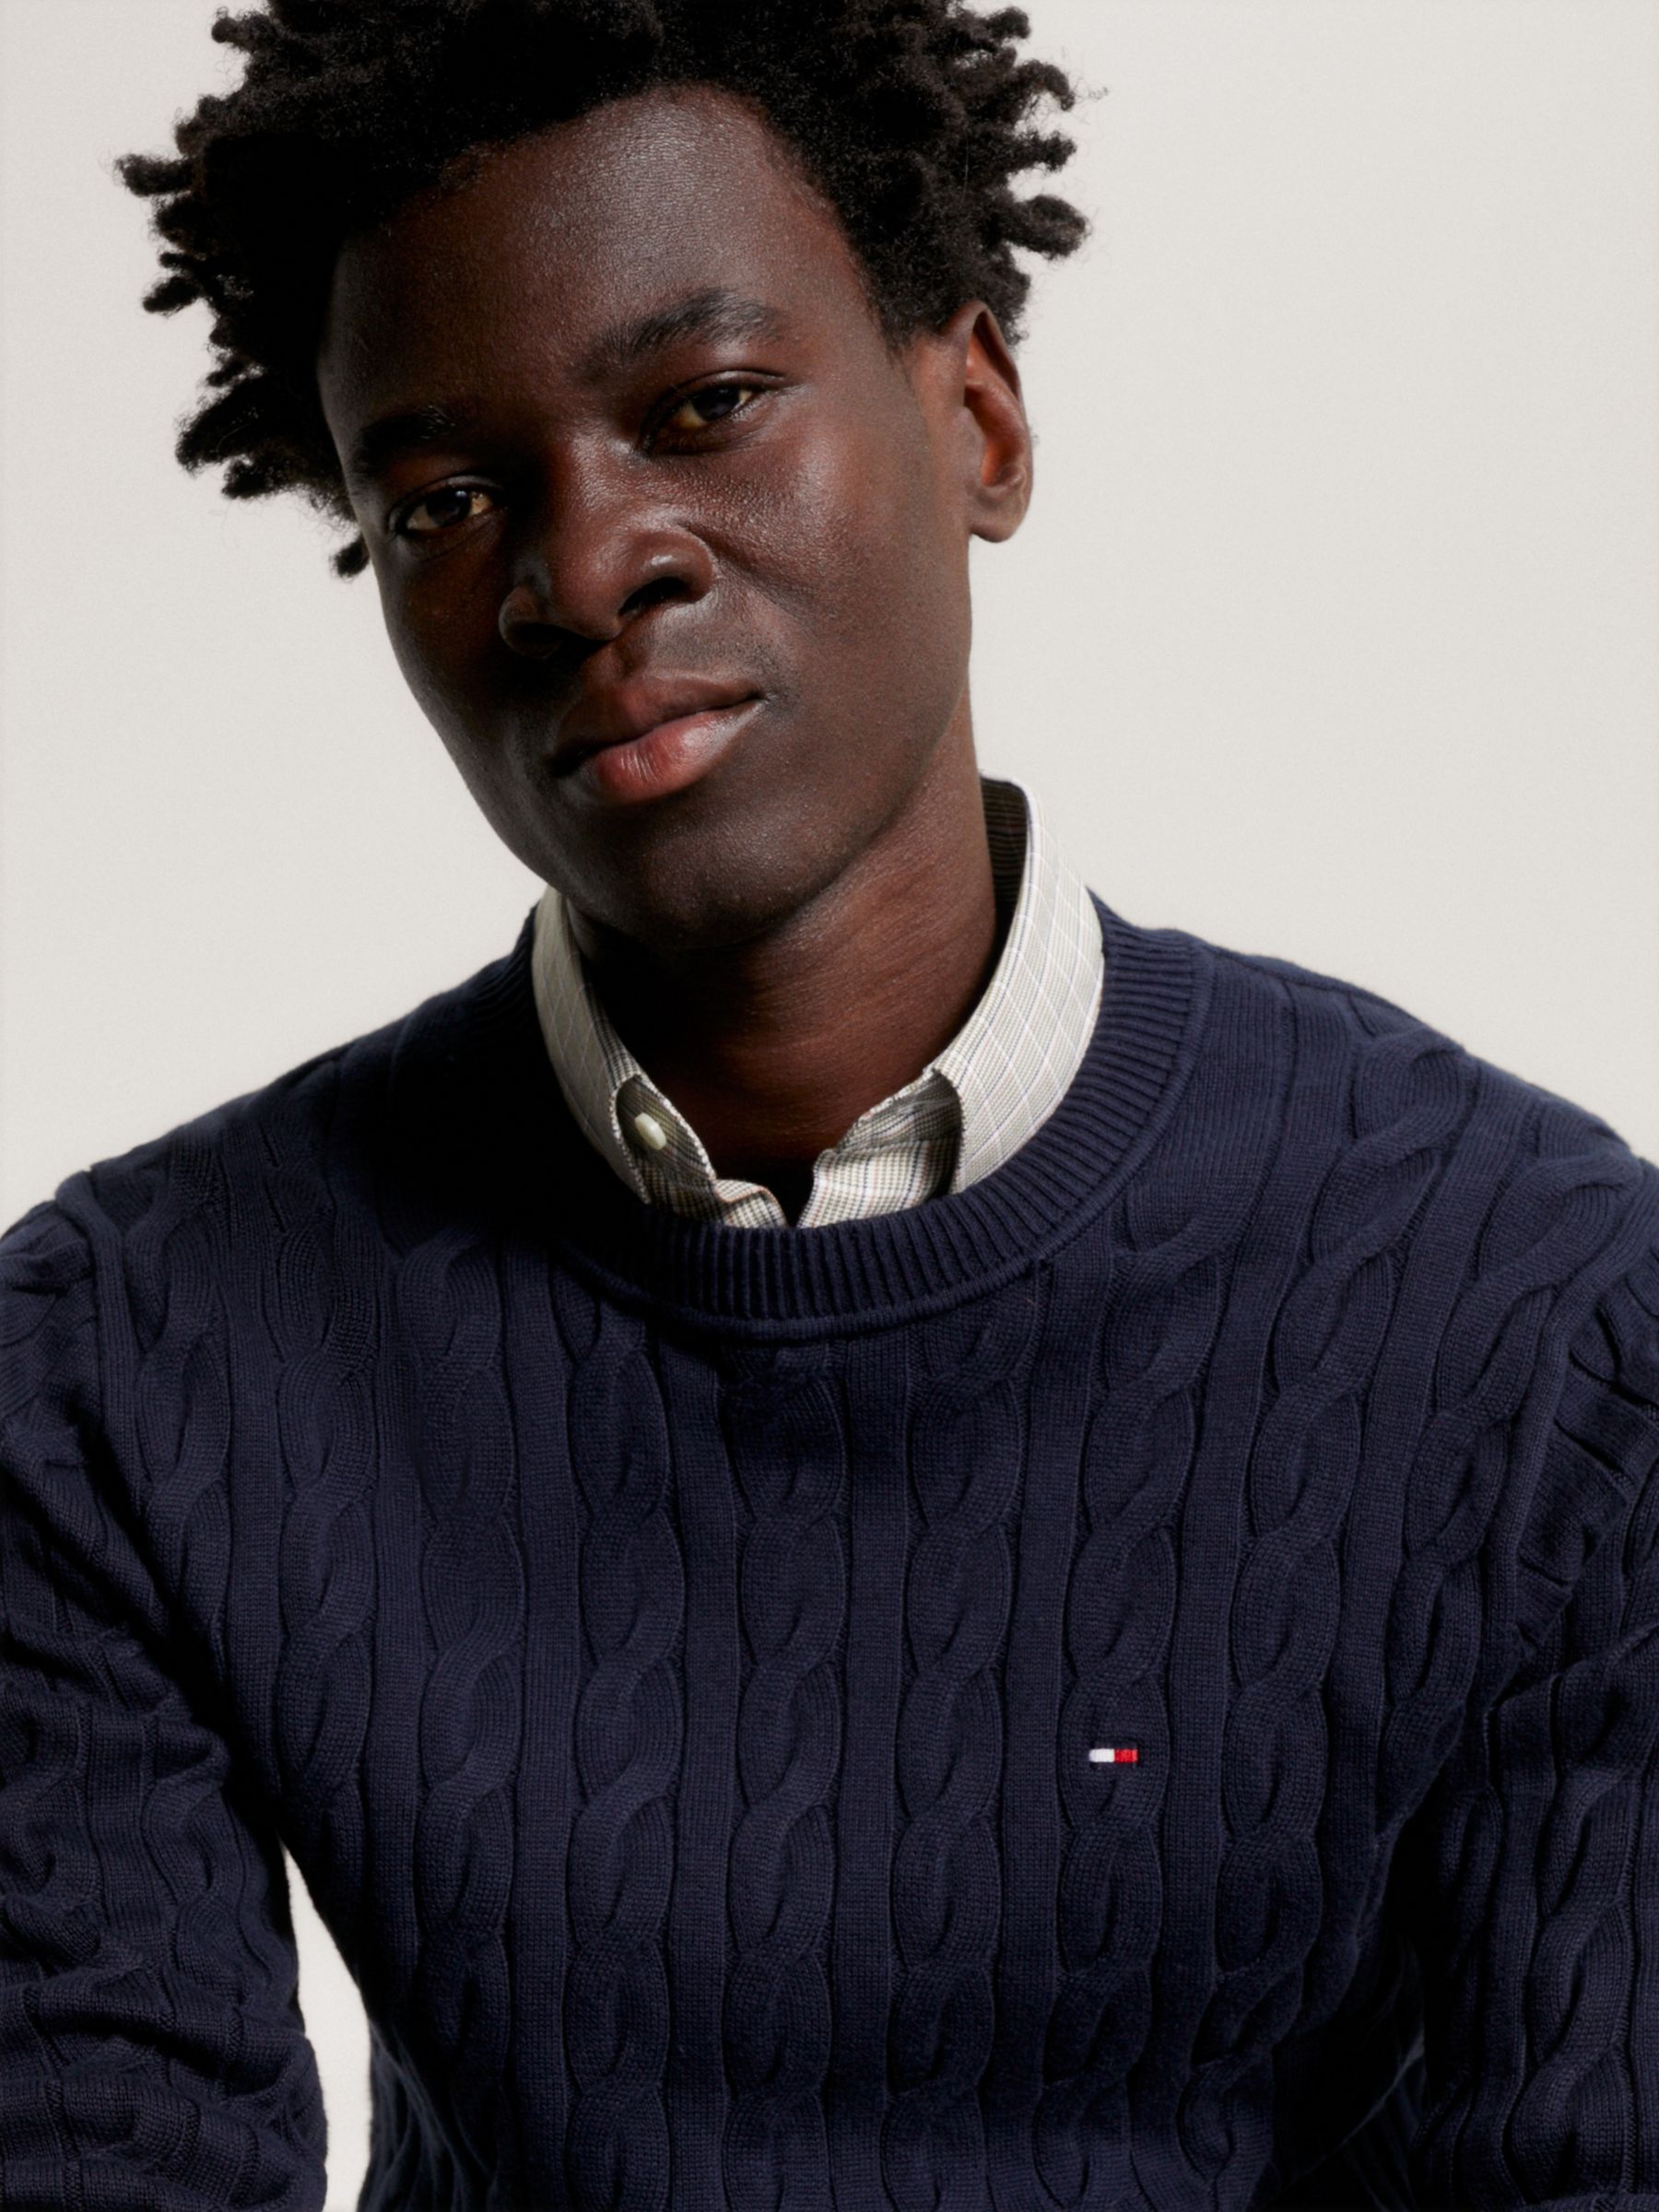 Buy Tommy Hilfiger Classic Cable Jumper Online at johnlewis.com